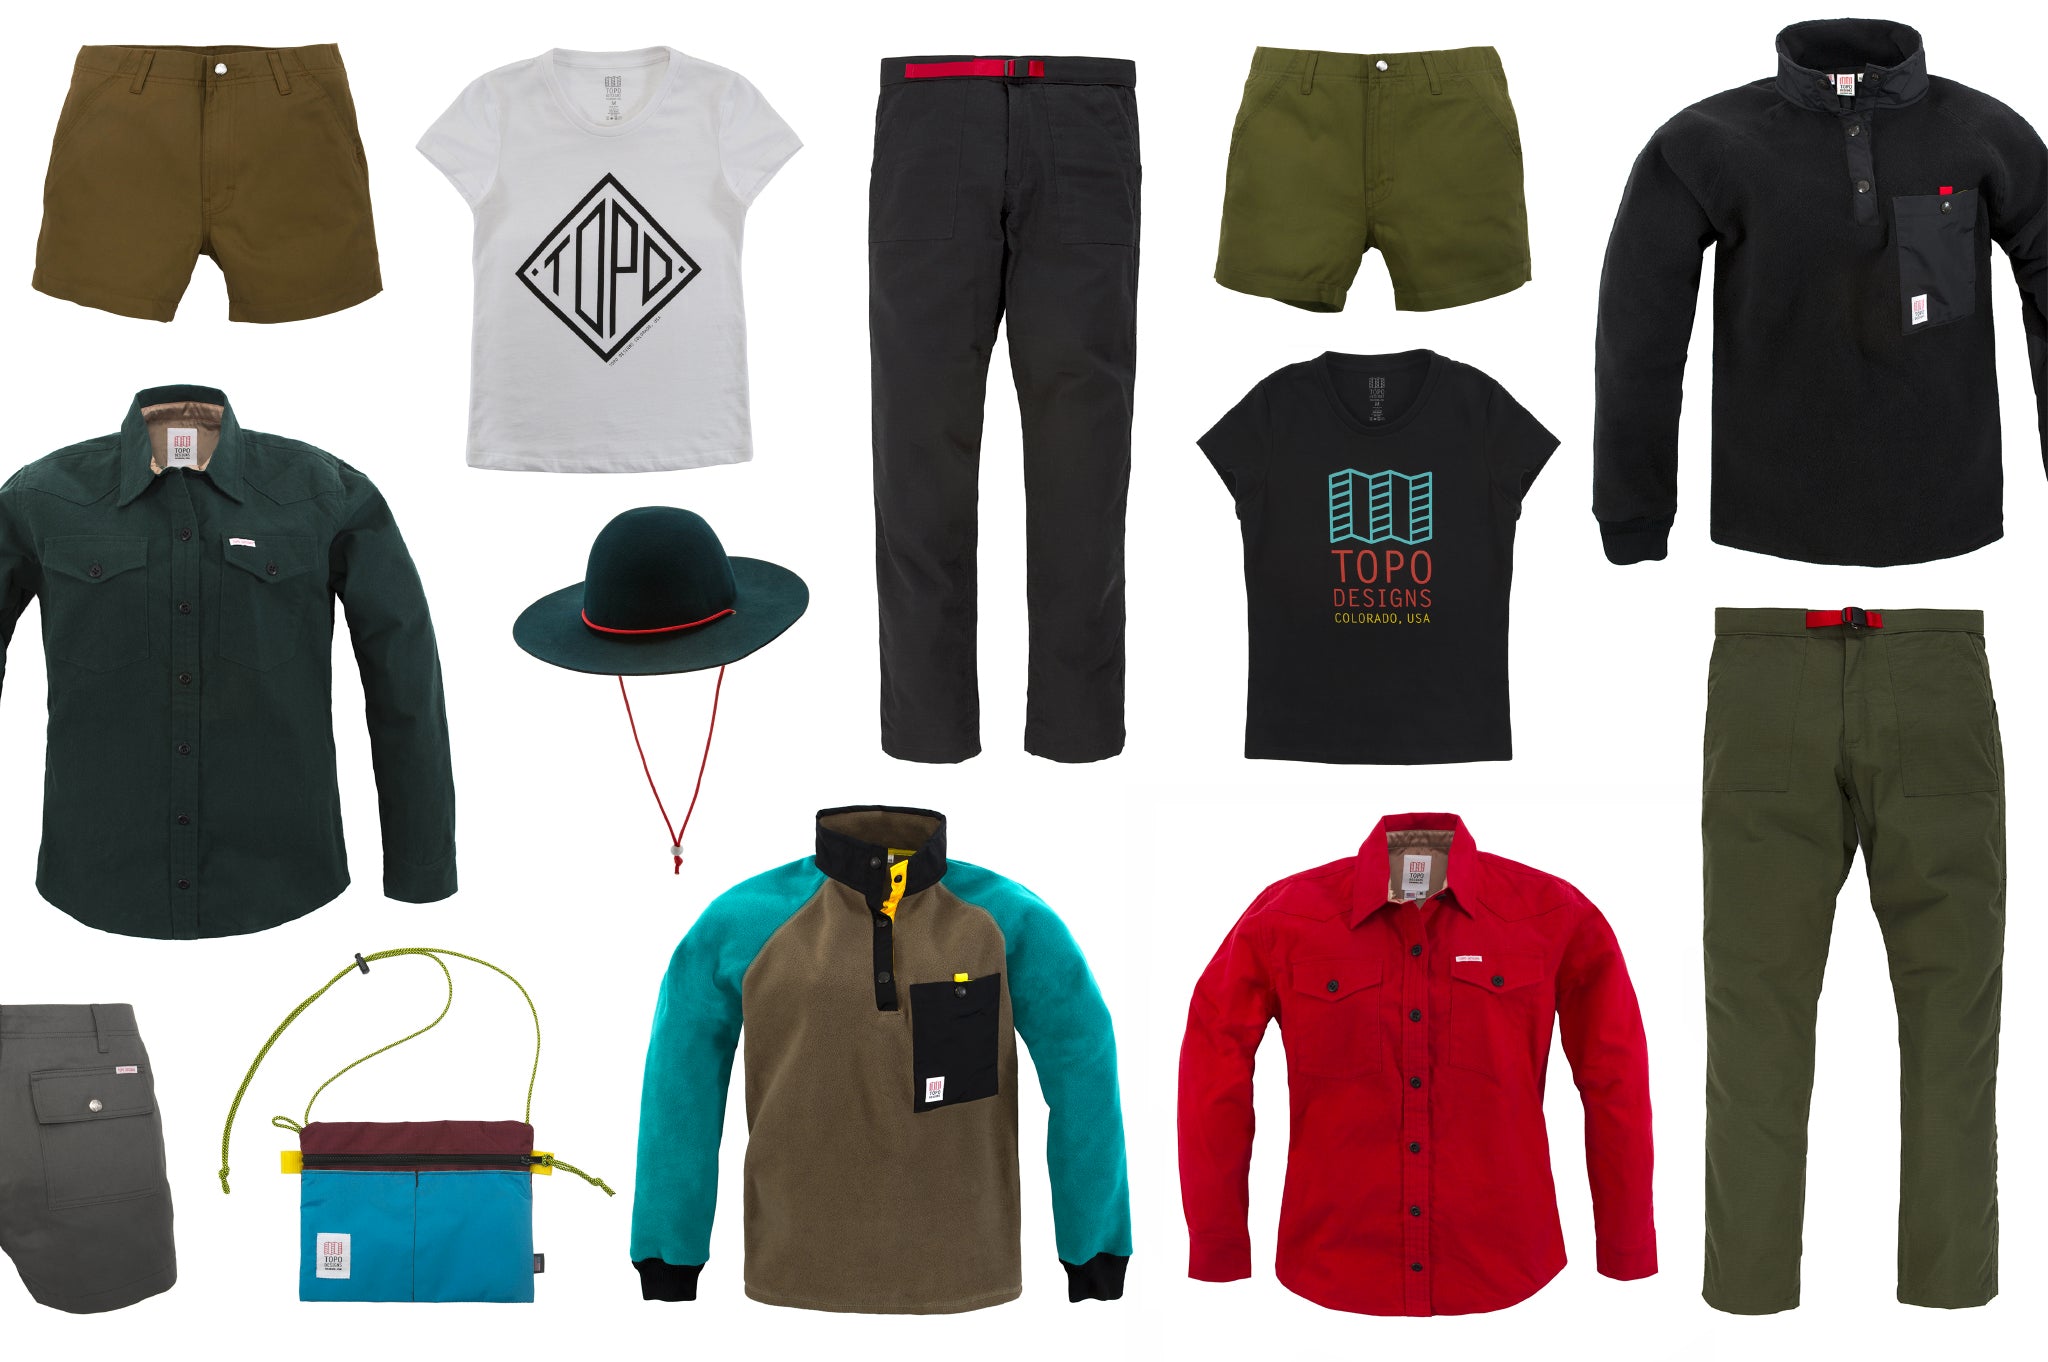 The New Topo Designs Women's Collection